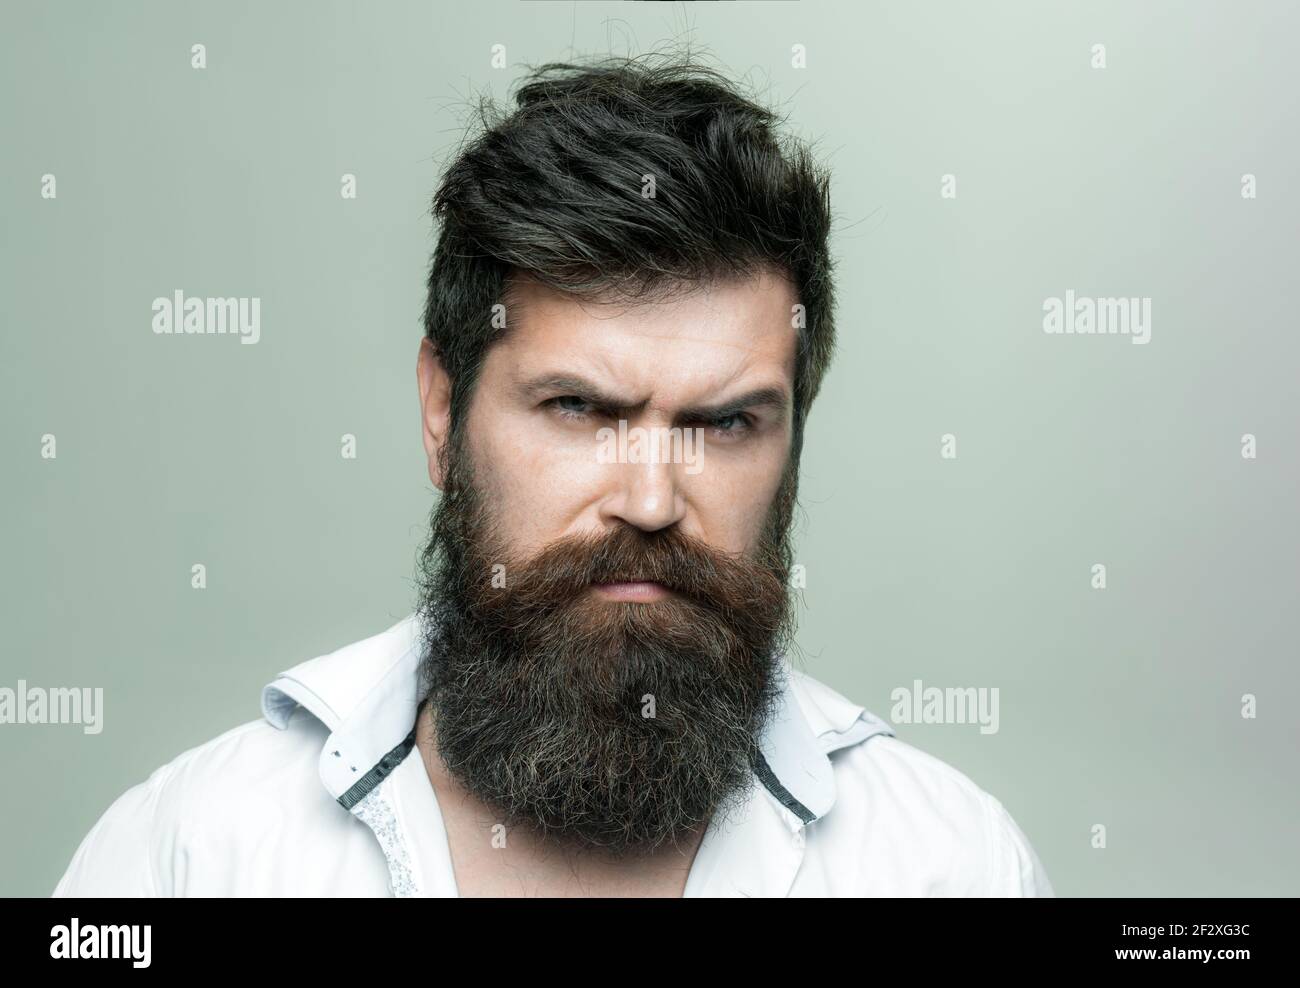 Man with long beard, mustache and stylish hair, light background. Macho on  strict face, wears unbuttoned shirt. Guy with modern hairstyle visited  Stock Photo - Alamy